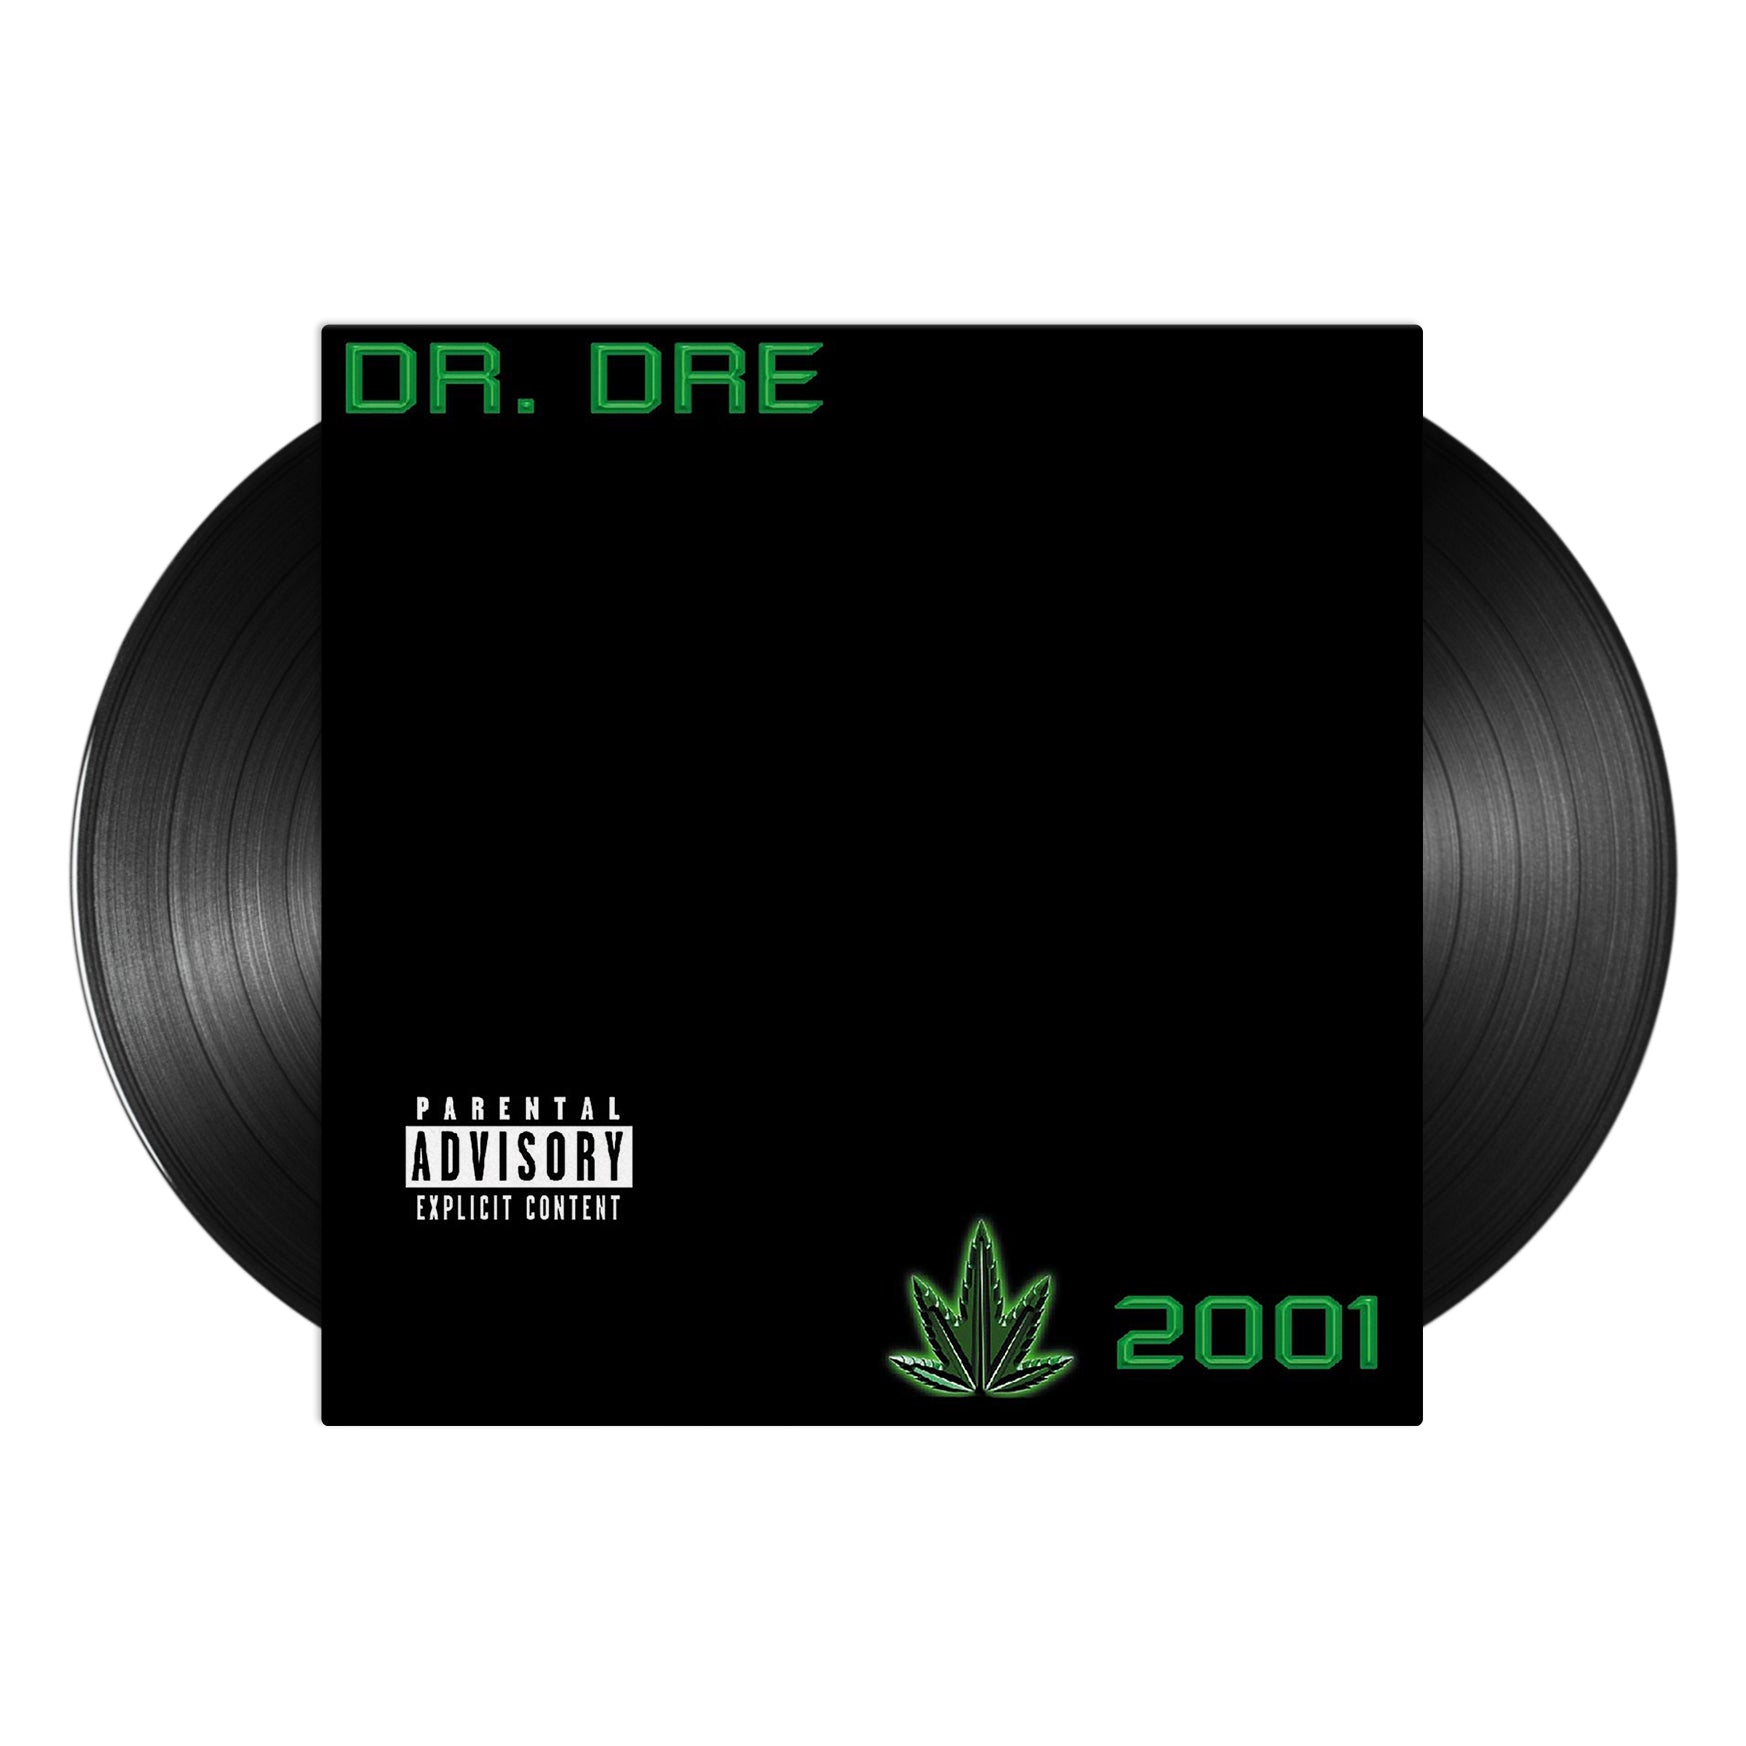 Dr. Dre – The Watcher (2001, CD) - Discogs